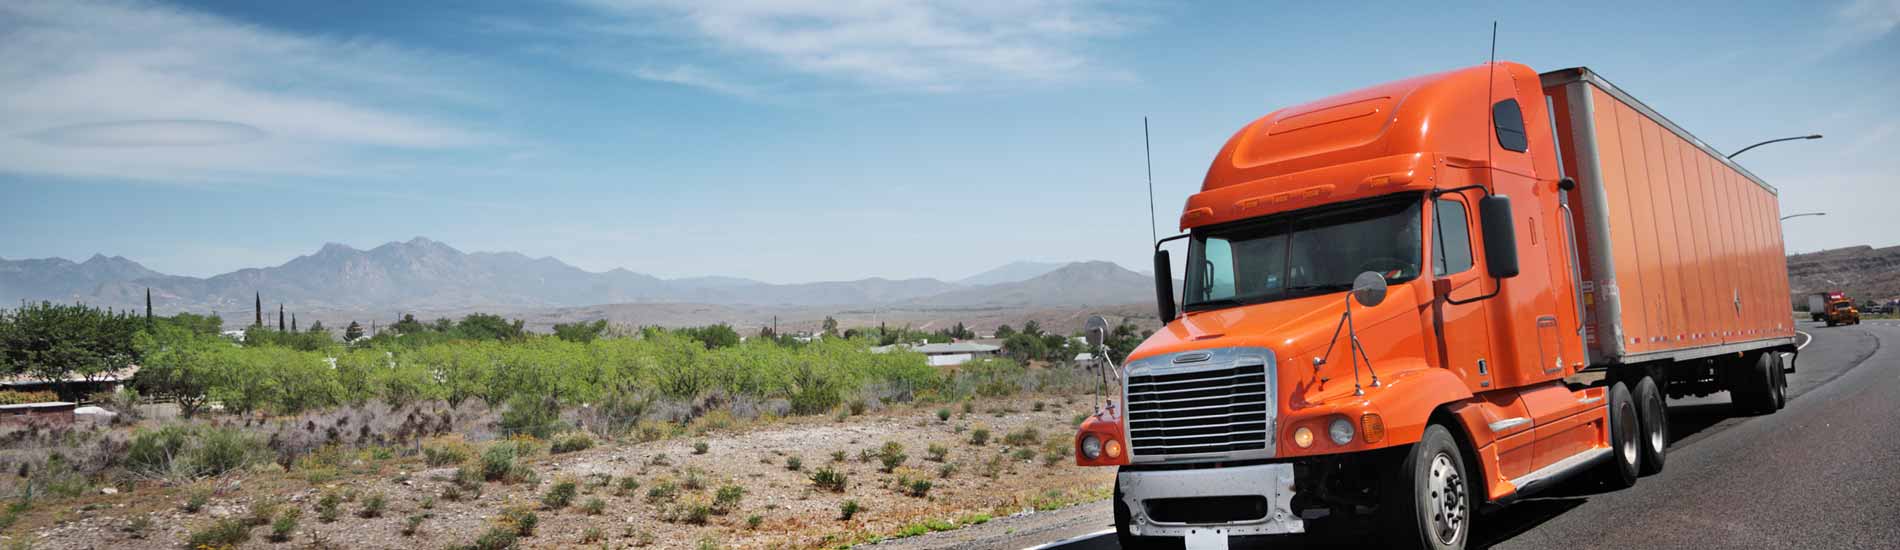 Costs to consider truck owner operator